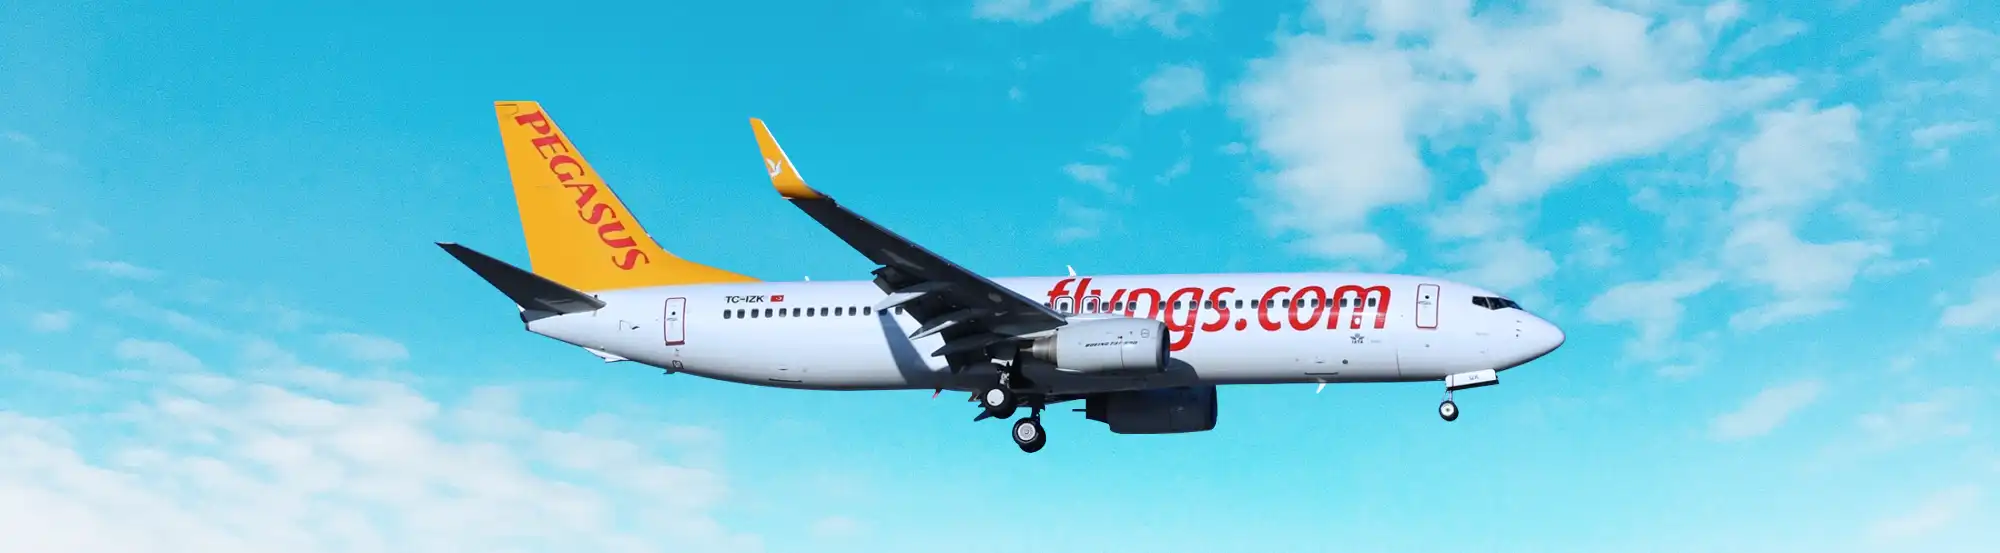 Pegasus Airlines Online Booking Deal - Up to 15% off on Pegasus ...